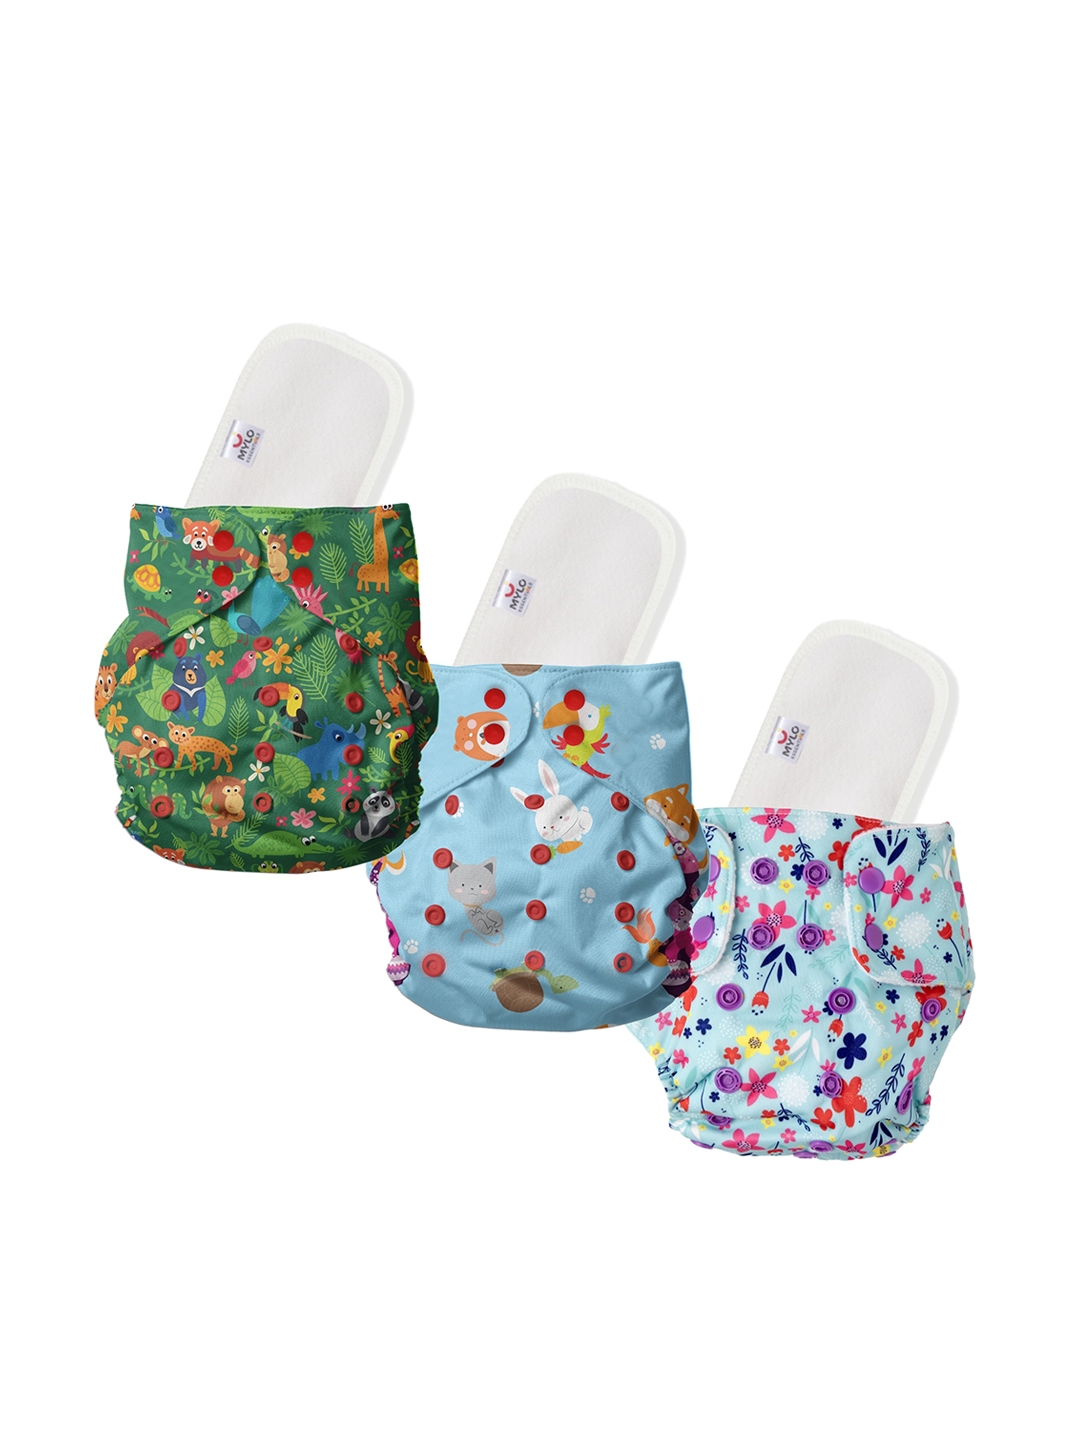 Buy Mylo Kids Set Of 3 Washable & Reusable Cloth Diaper - Diapers for  Unisex Kids 18265356